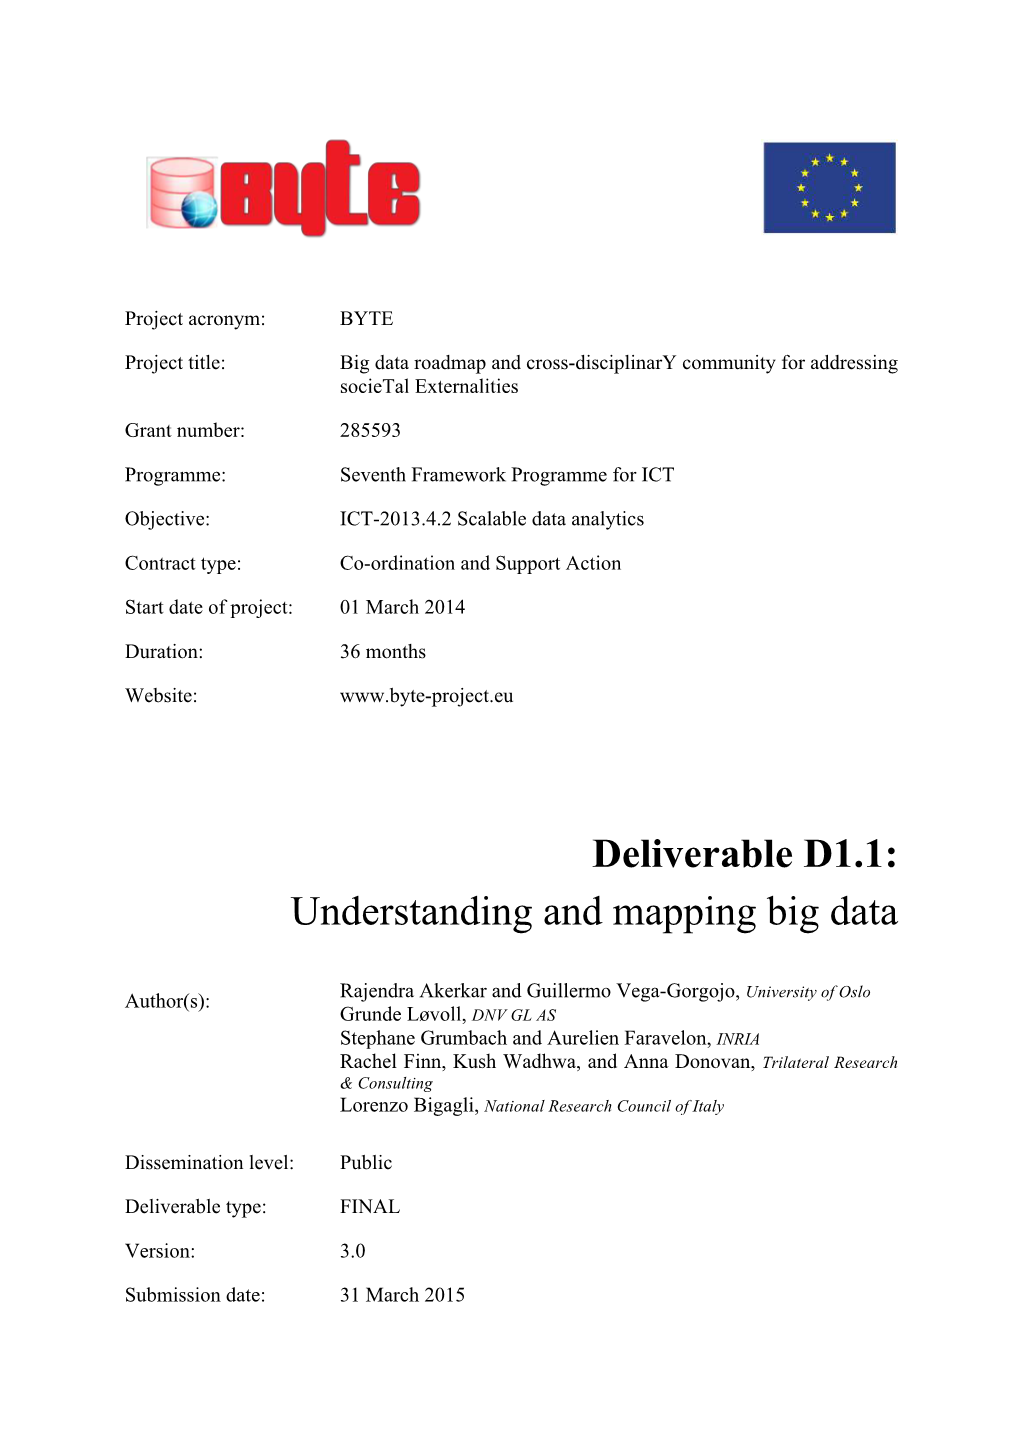 Deliverable D1.1: Understanding and Mapping Big Data